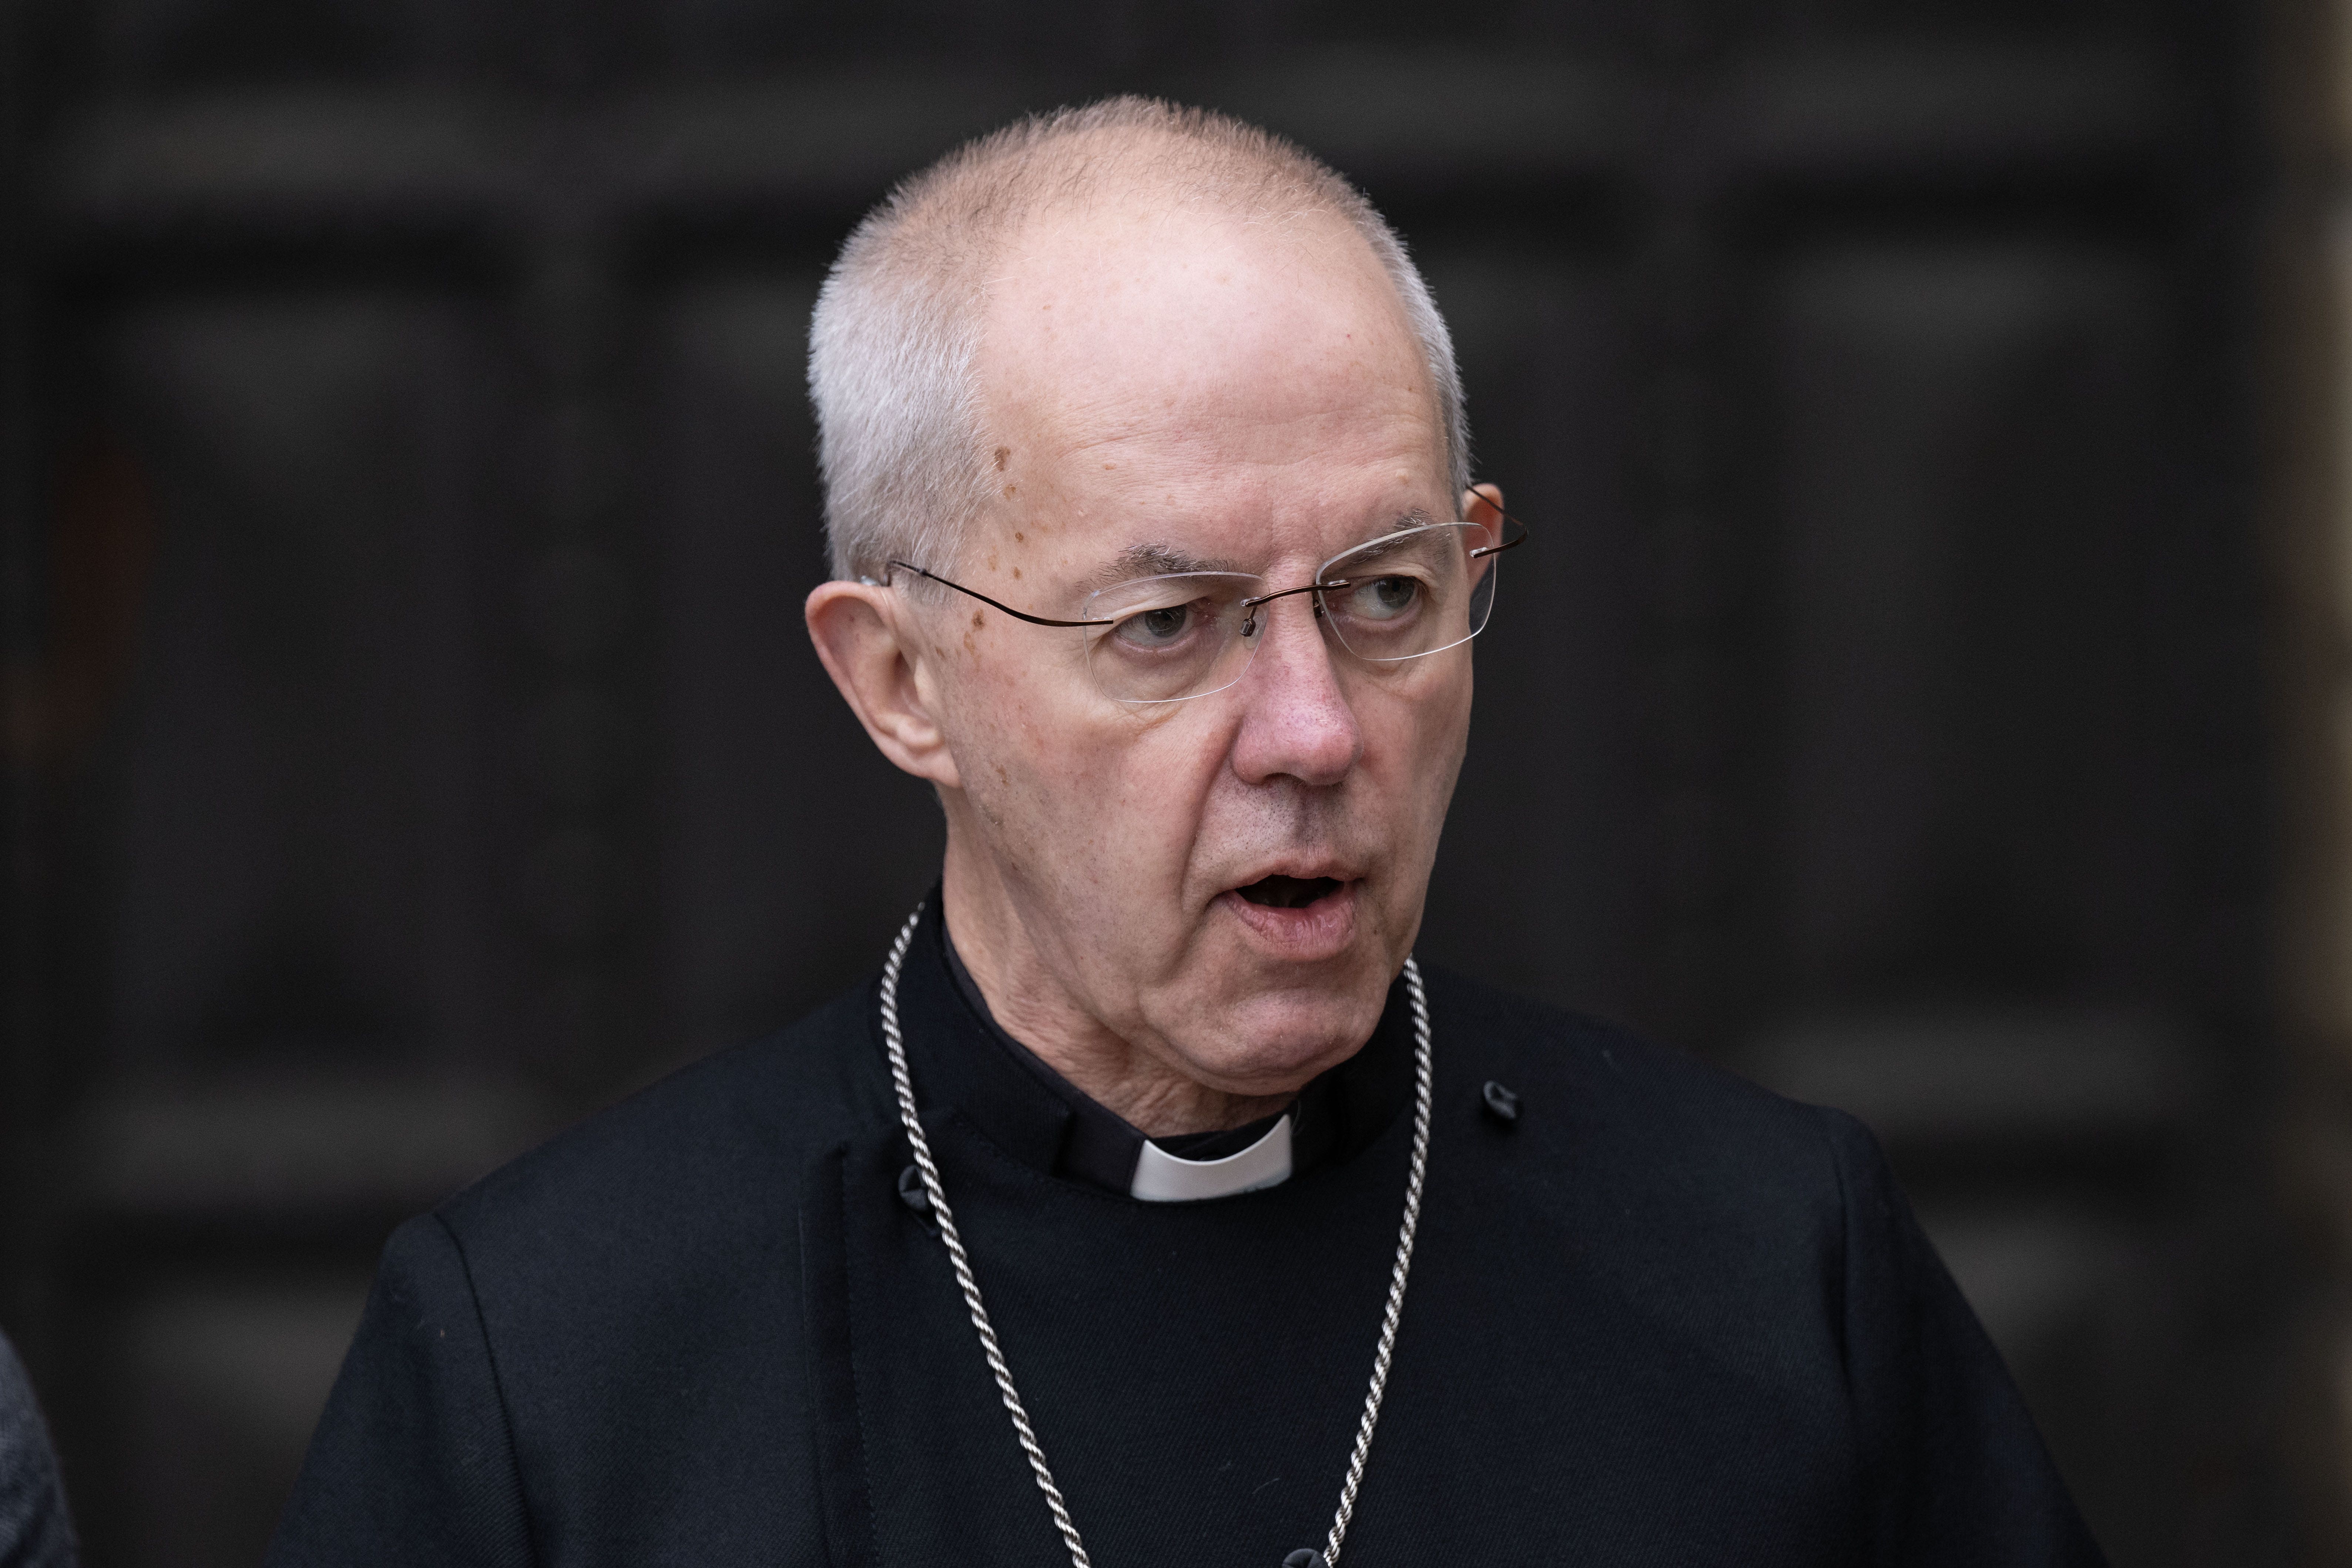 Justin Welby said the new definition of extremism ‘inadvertently threatens freedom of speech’